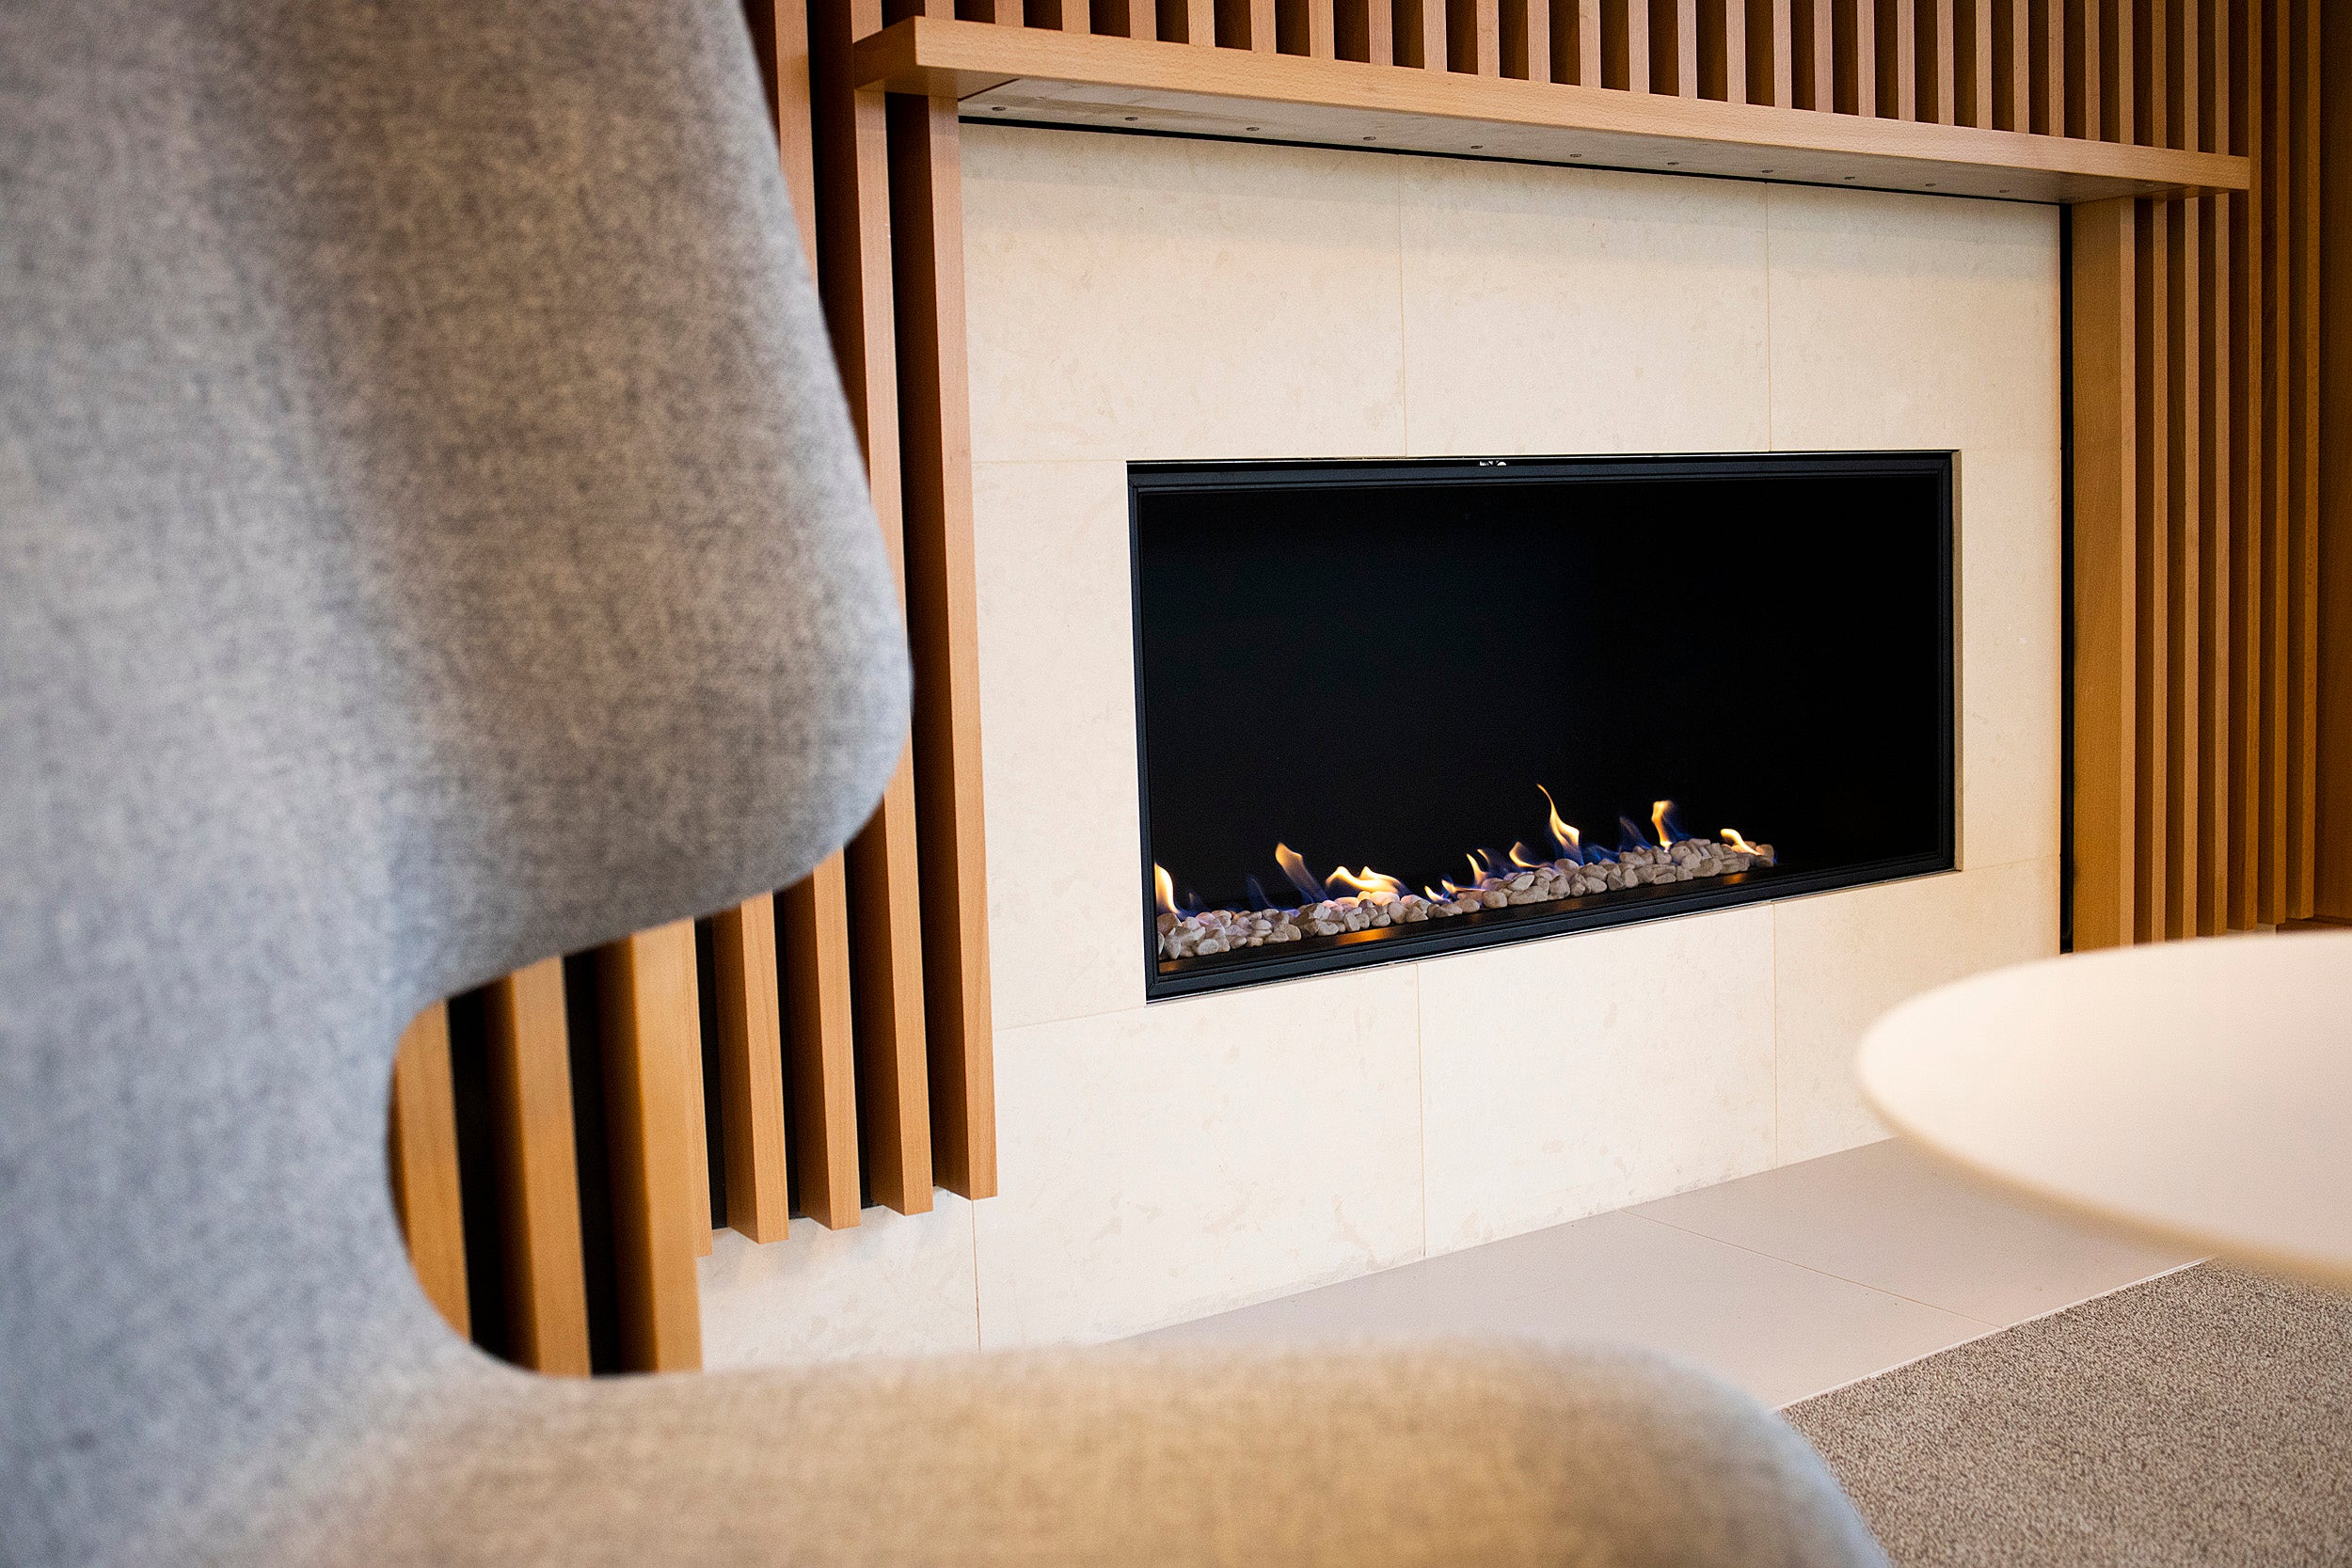 A modern gas fireplace at the Smith Campus Center.